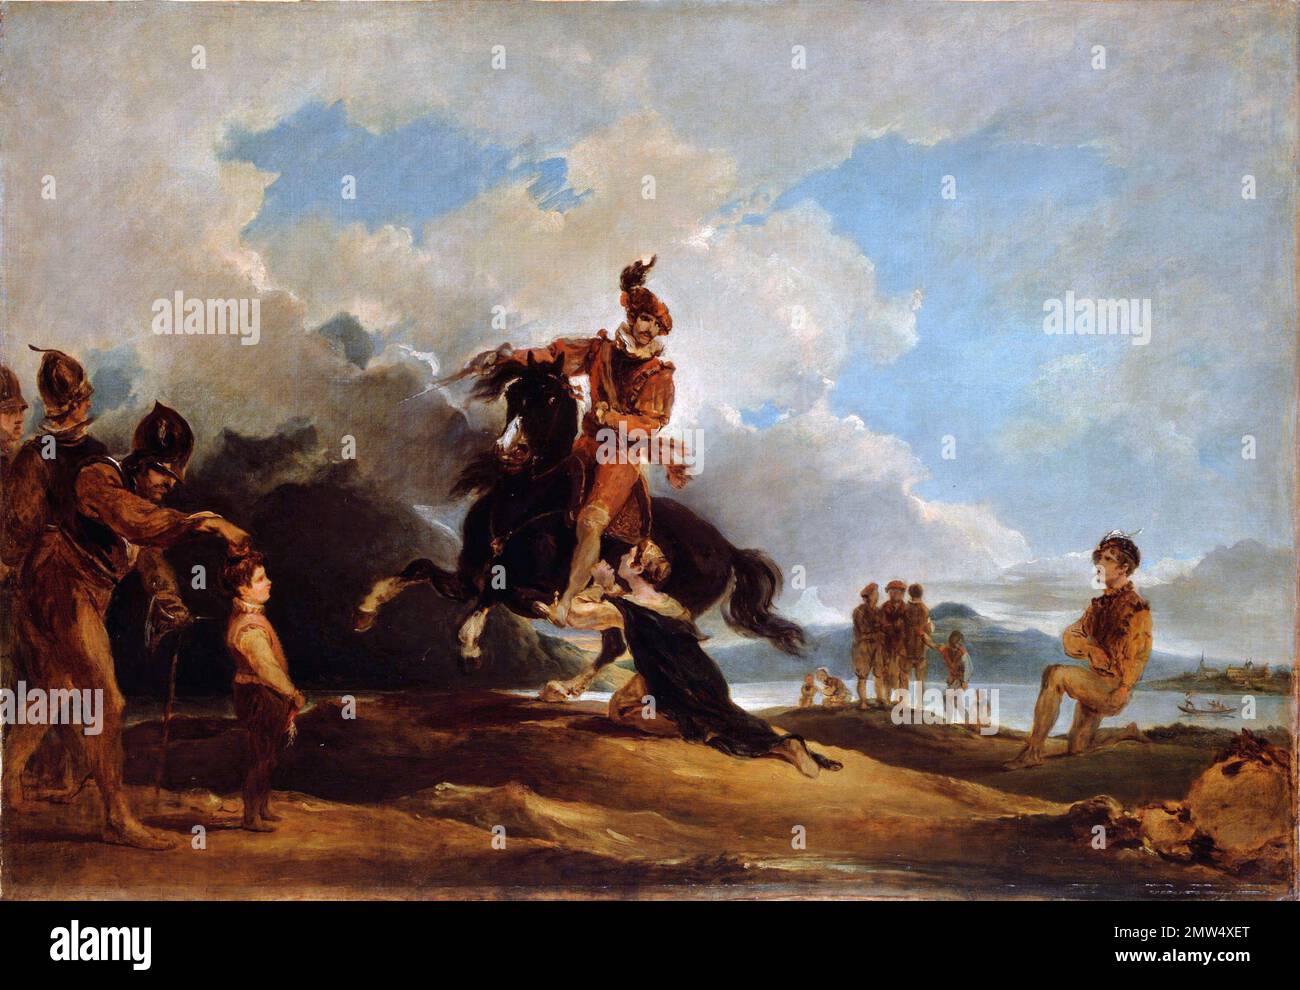 William Tell about to shoot an apple of the head of his son, painting by Francis Bourgeois, oil on canvas, before 1811. William Tell was a folk hero in Switzerland in the 14th century. Stock Photo